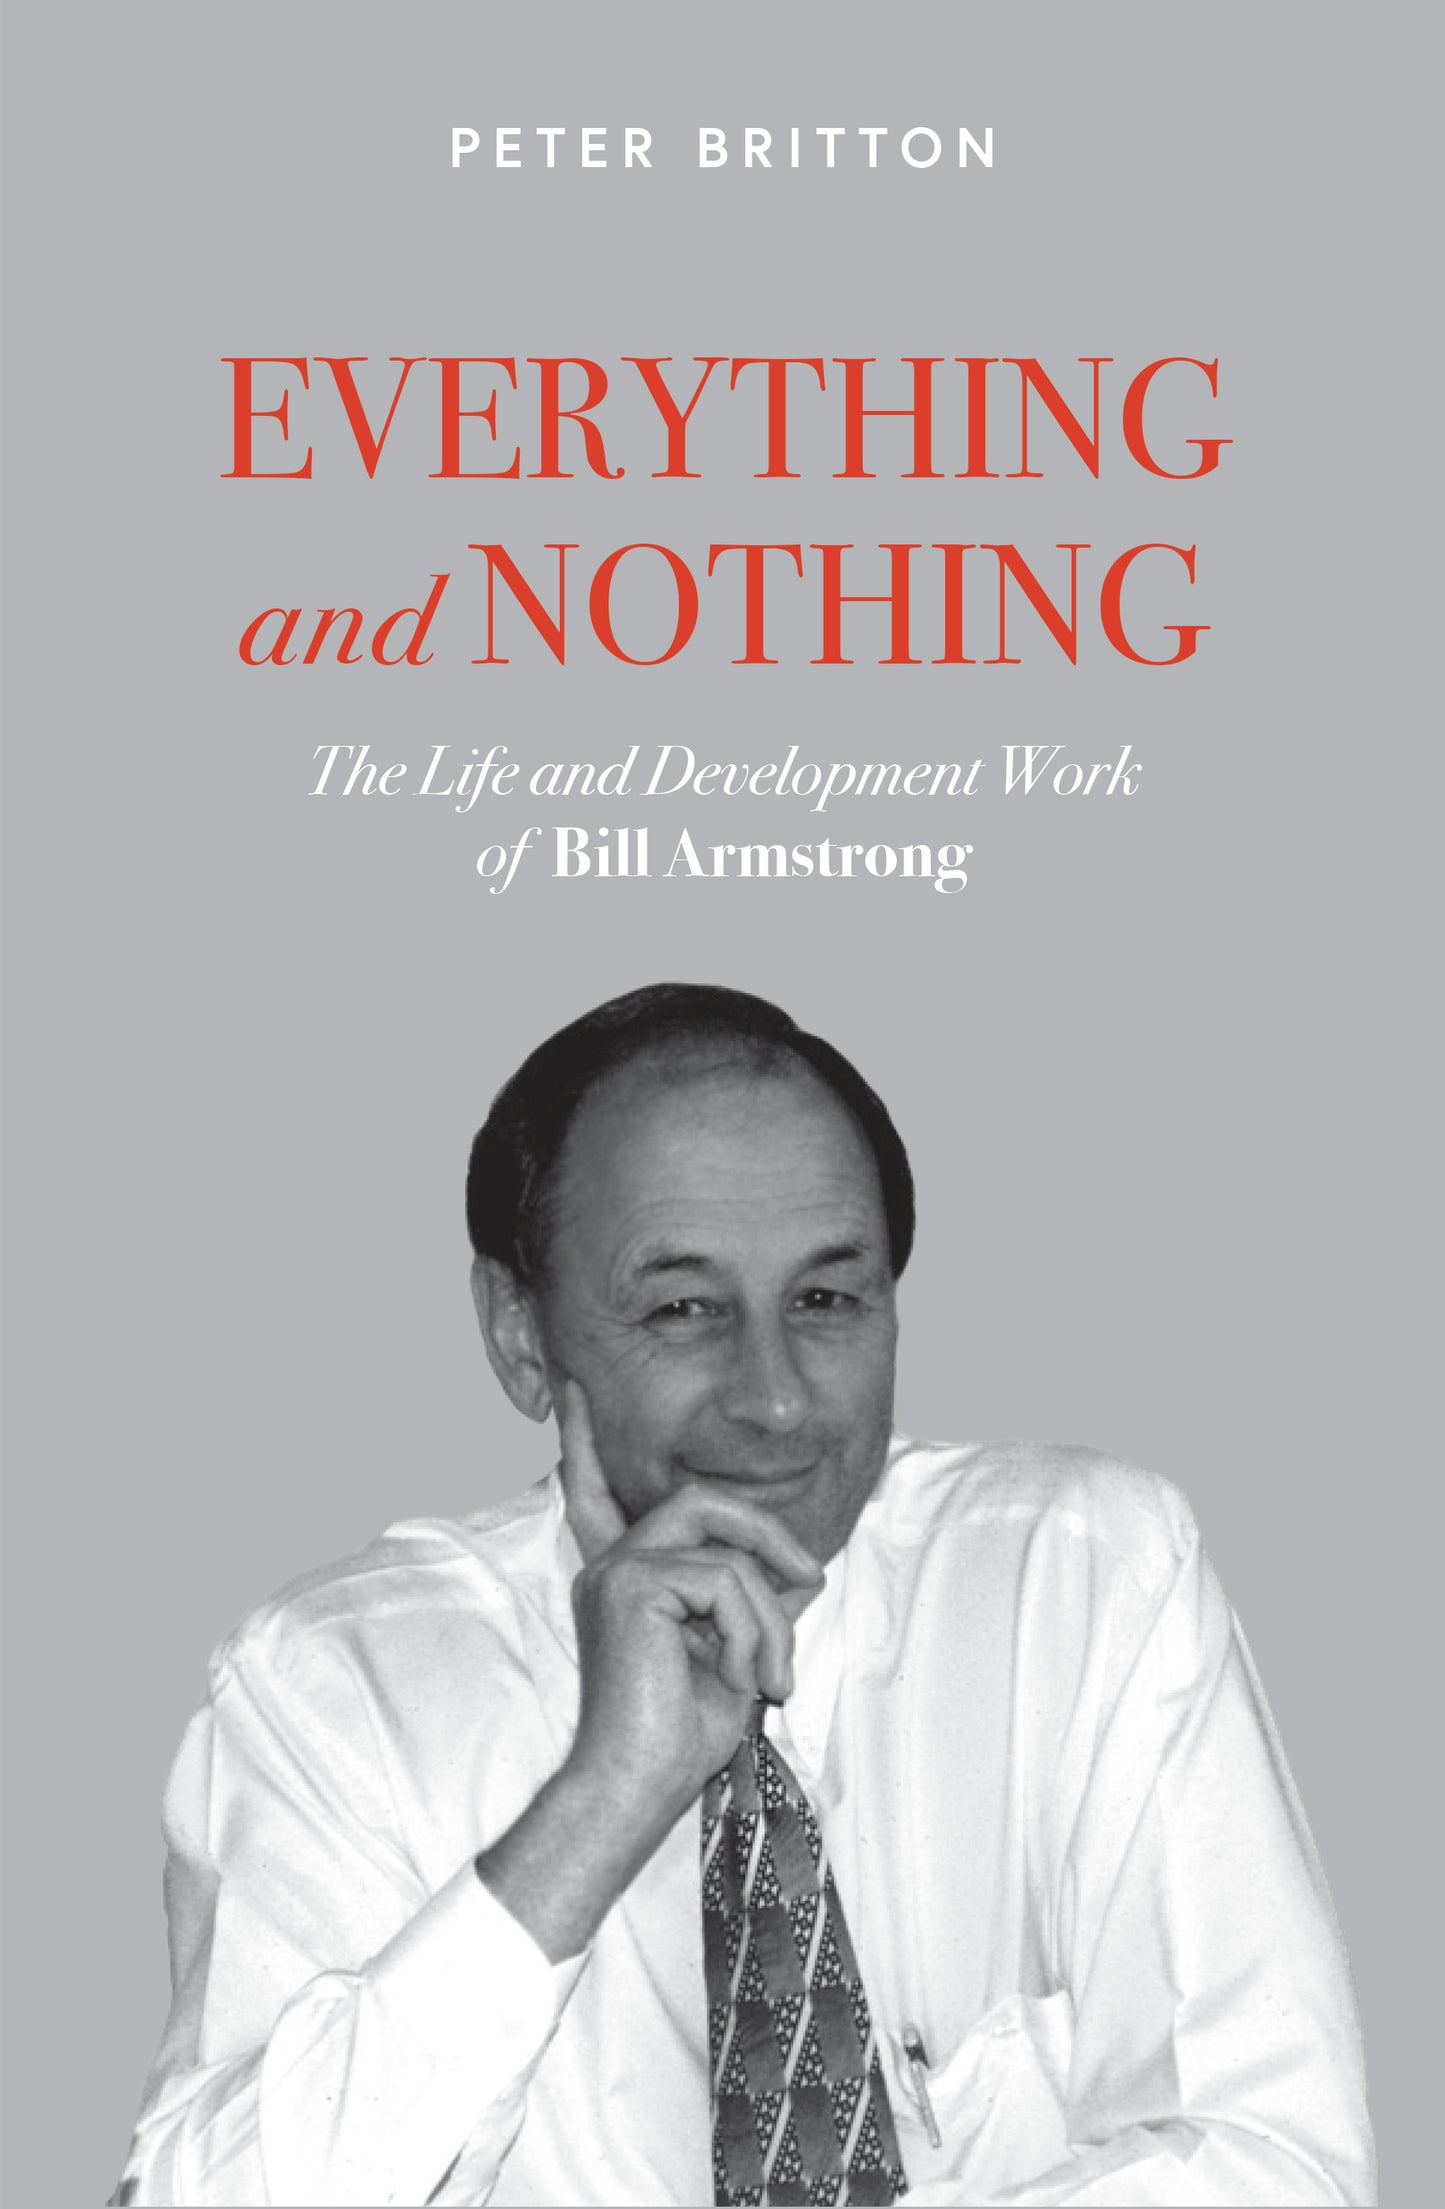 The Life and Development Work of Bill Armstrong by Peter Britton